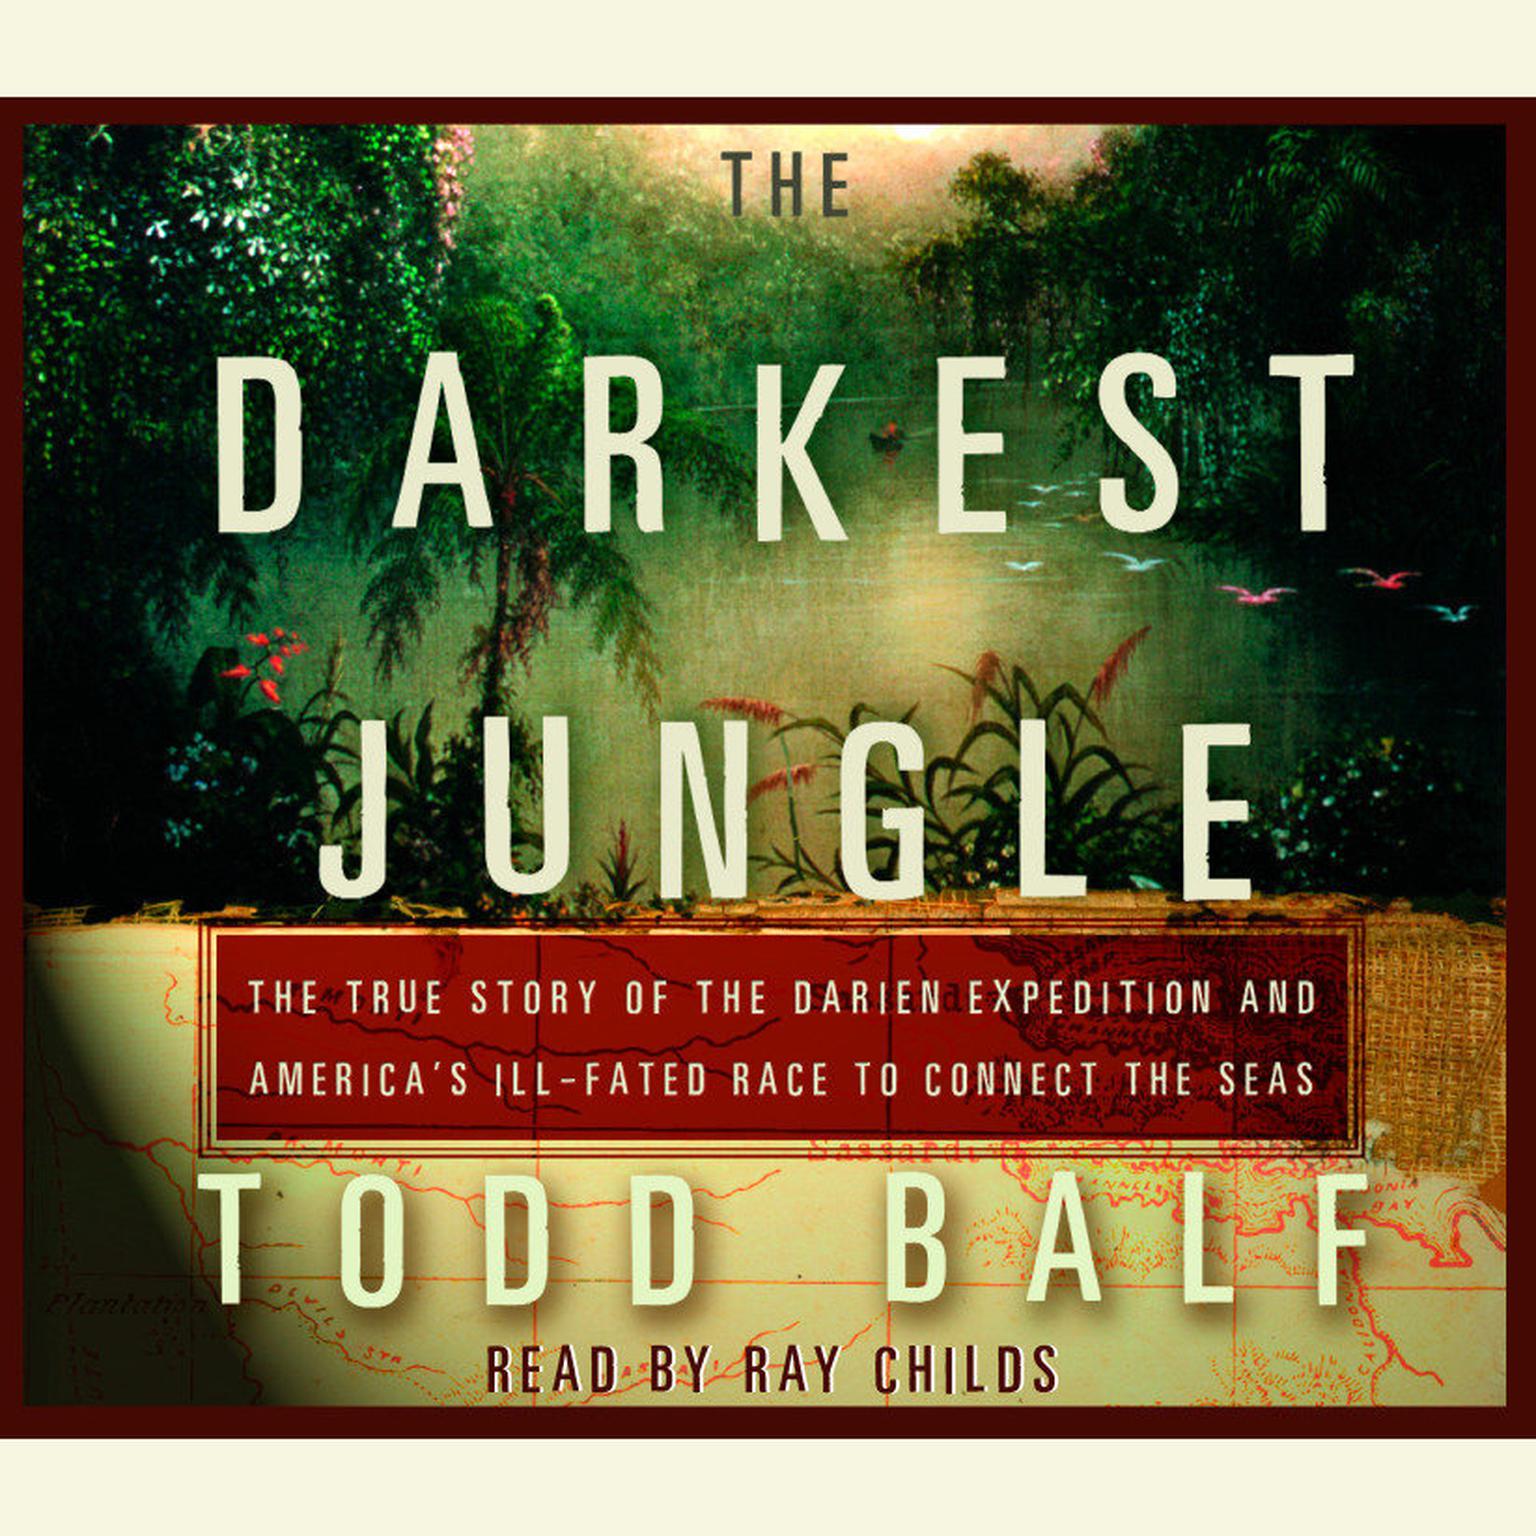 The Darkest Jungle (Abridged): The True Story of the Darien Expedition and Americas Ill-Fated Race to Connect the Seas Audiobook, by Todd Balf